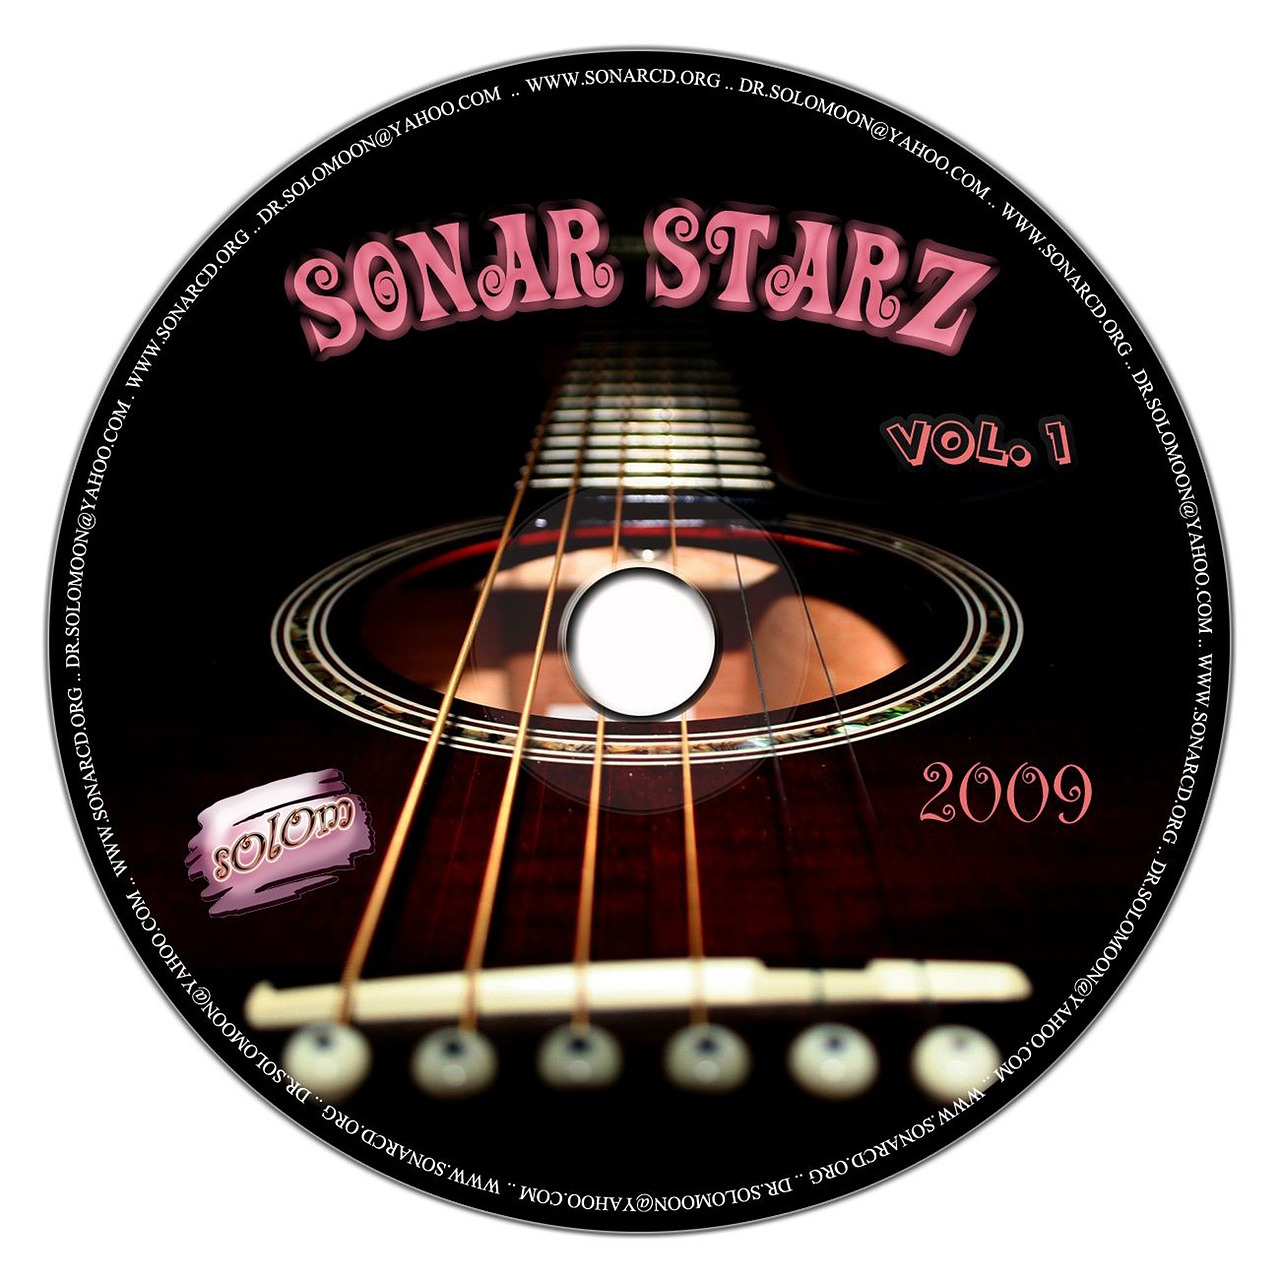 song cd cover free photo